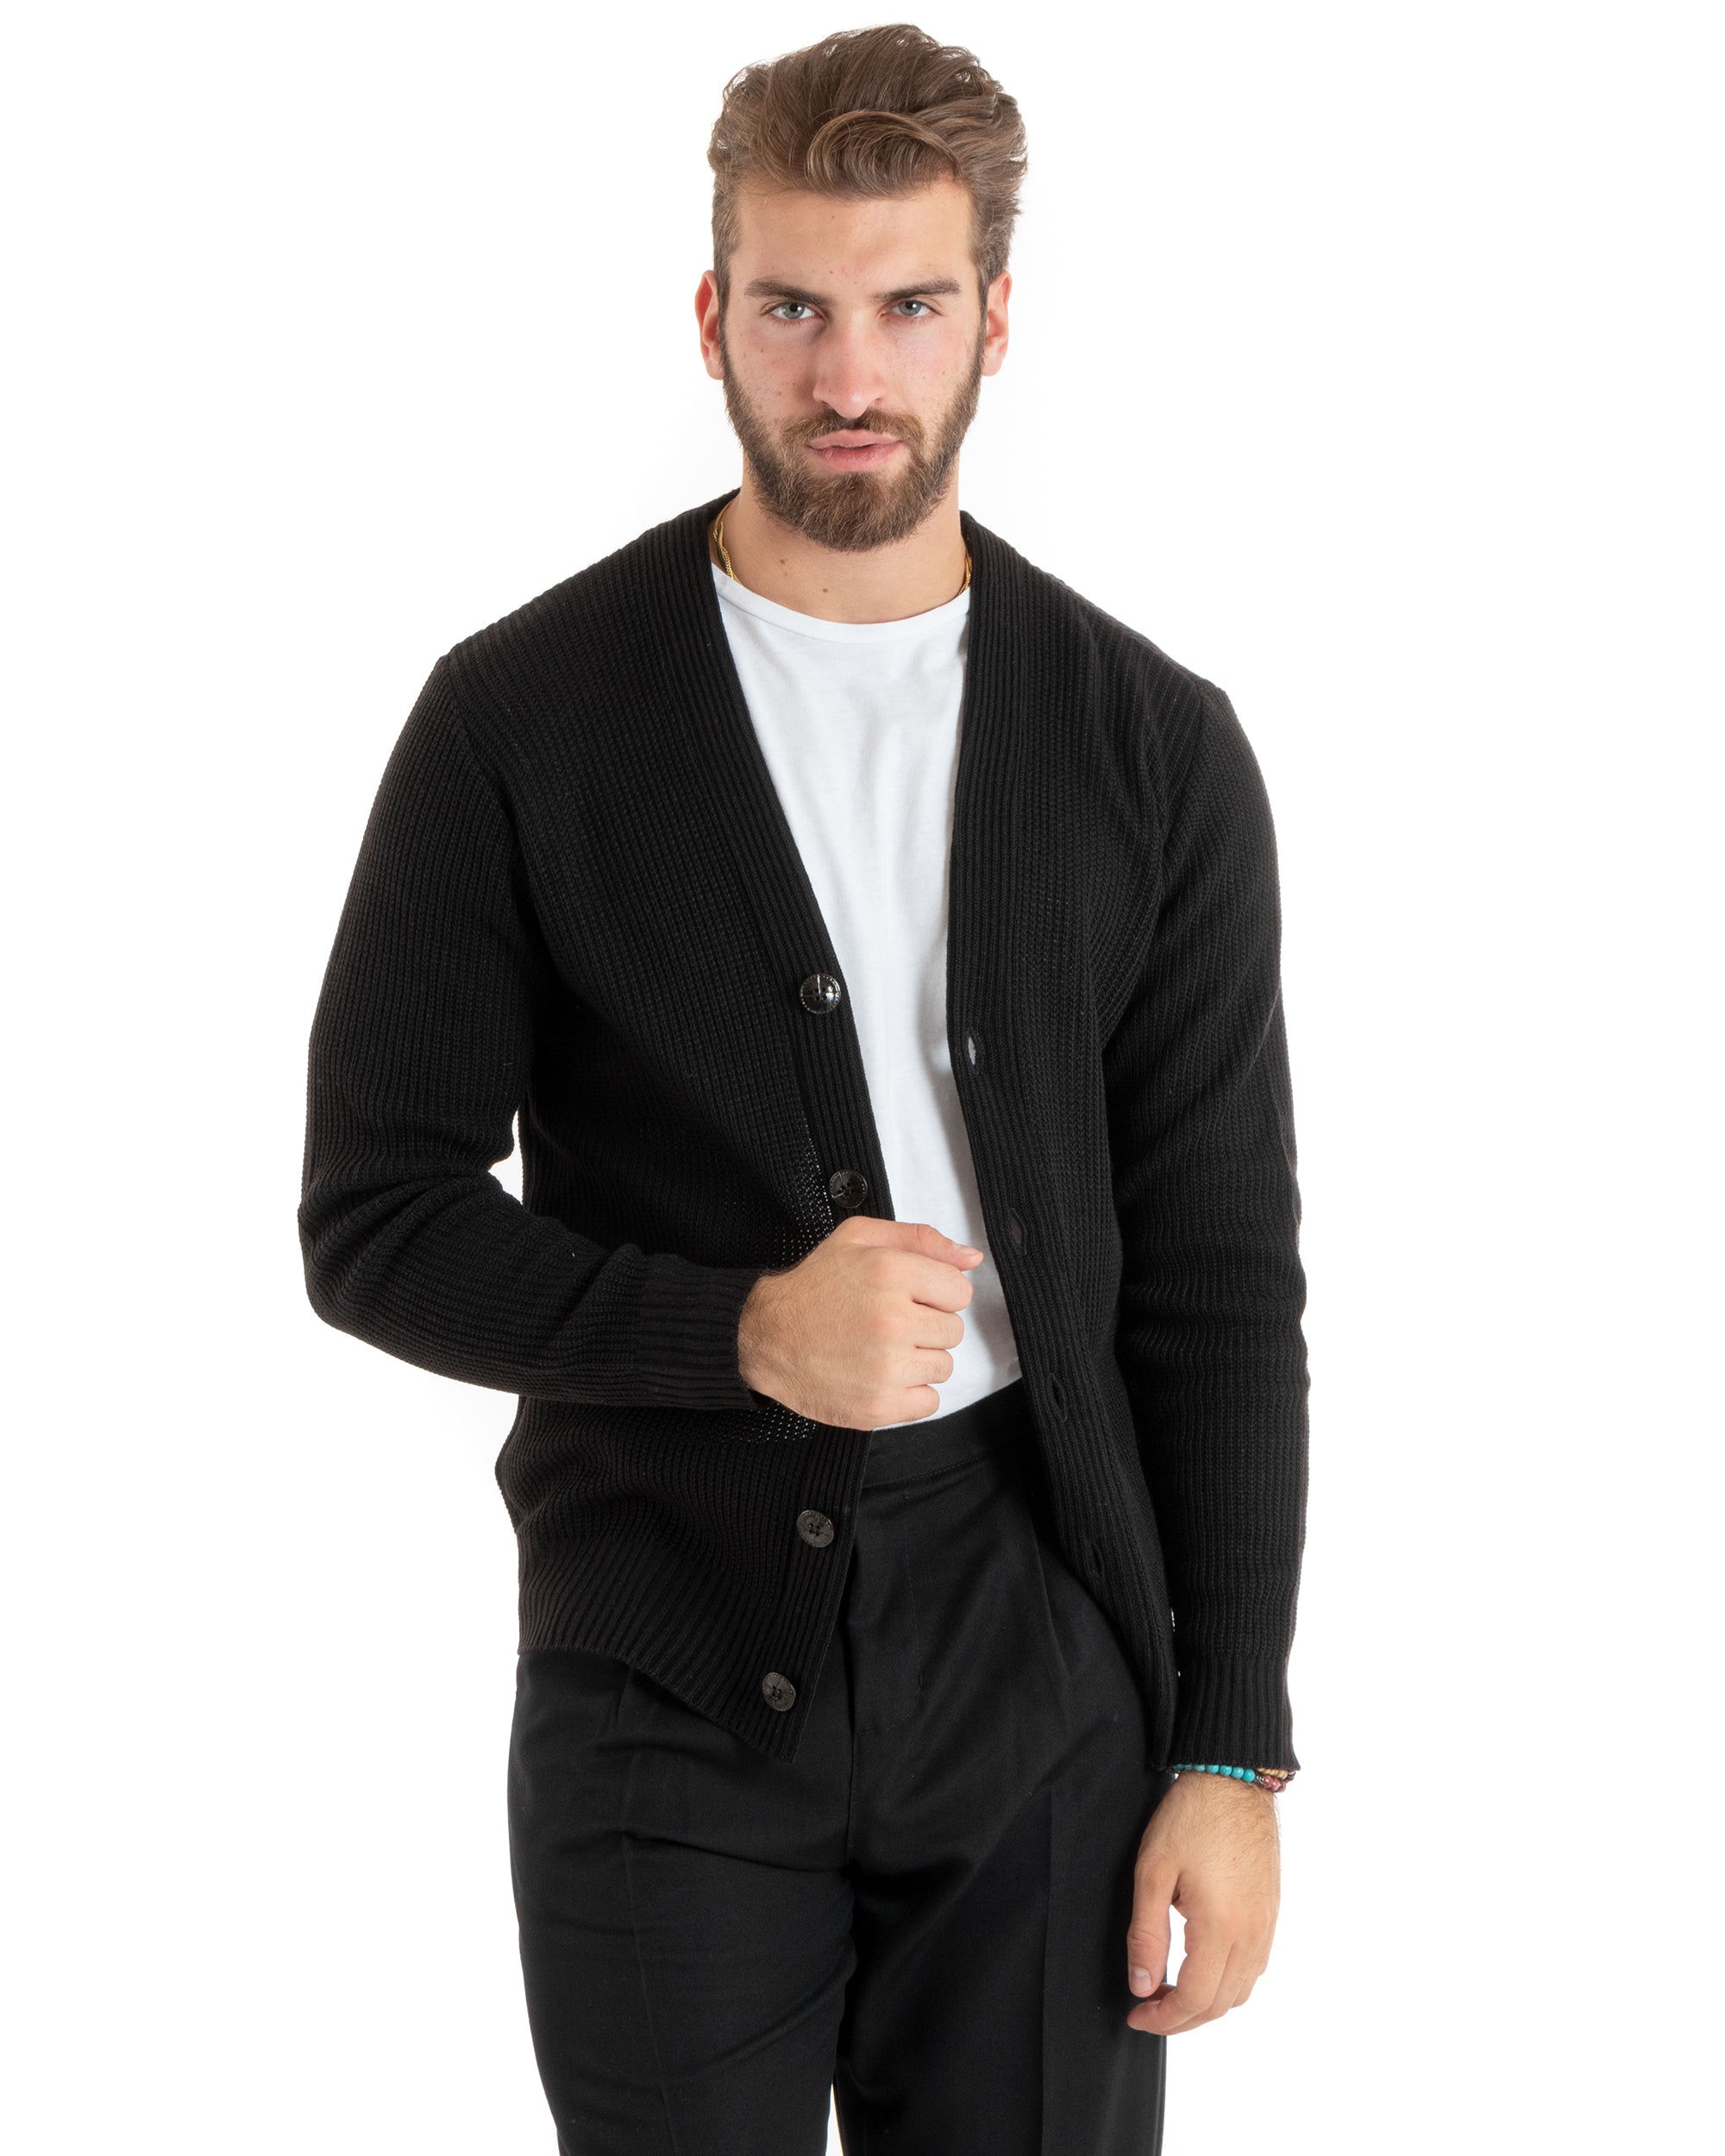 Men's Cardigan Jacket With Buttons V-Neck Sweater English Knit Black GIOSAL-M2675A